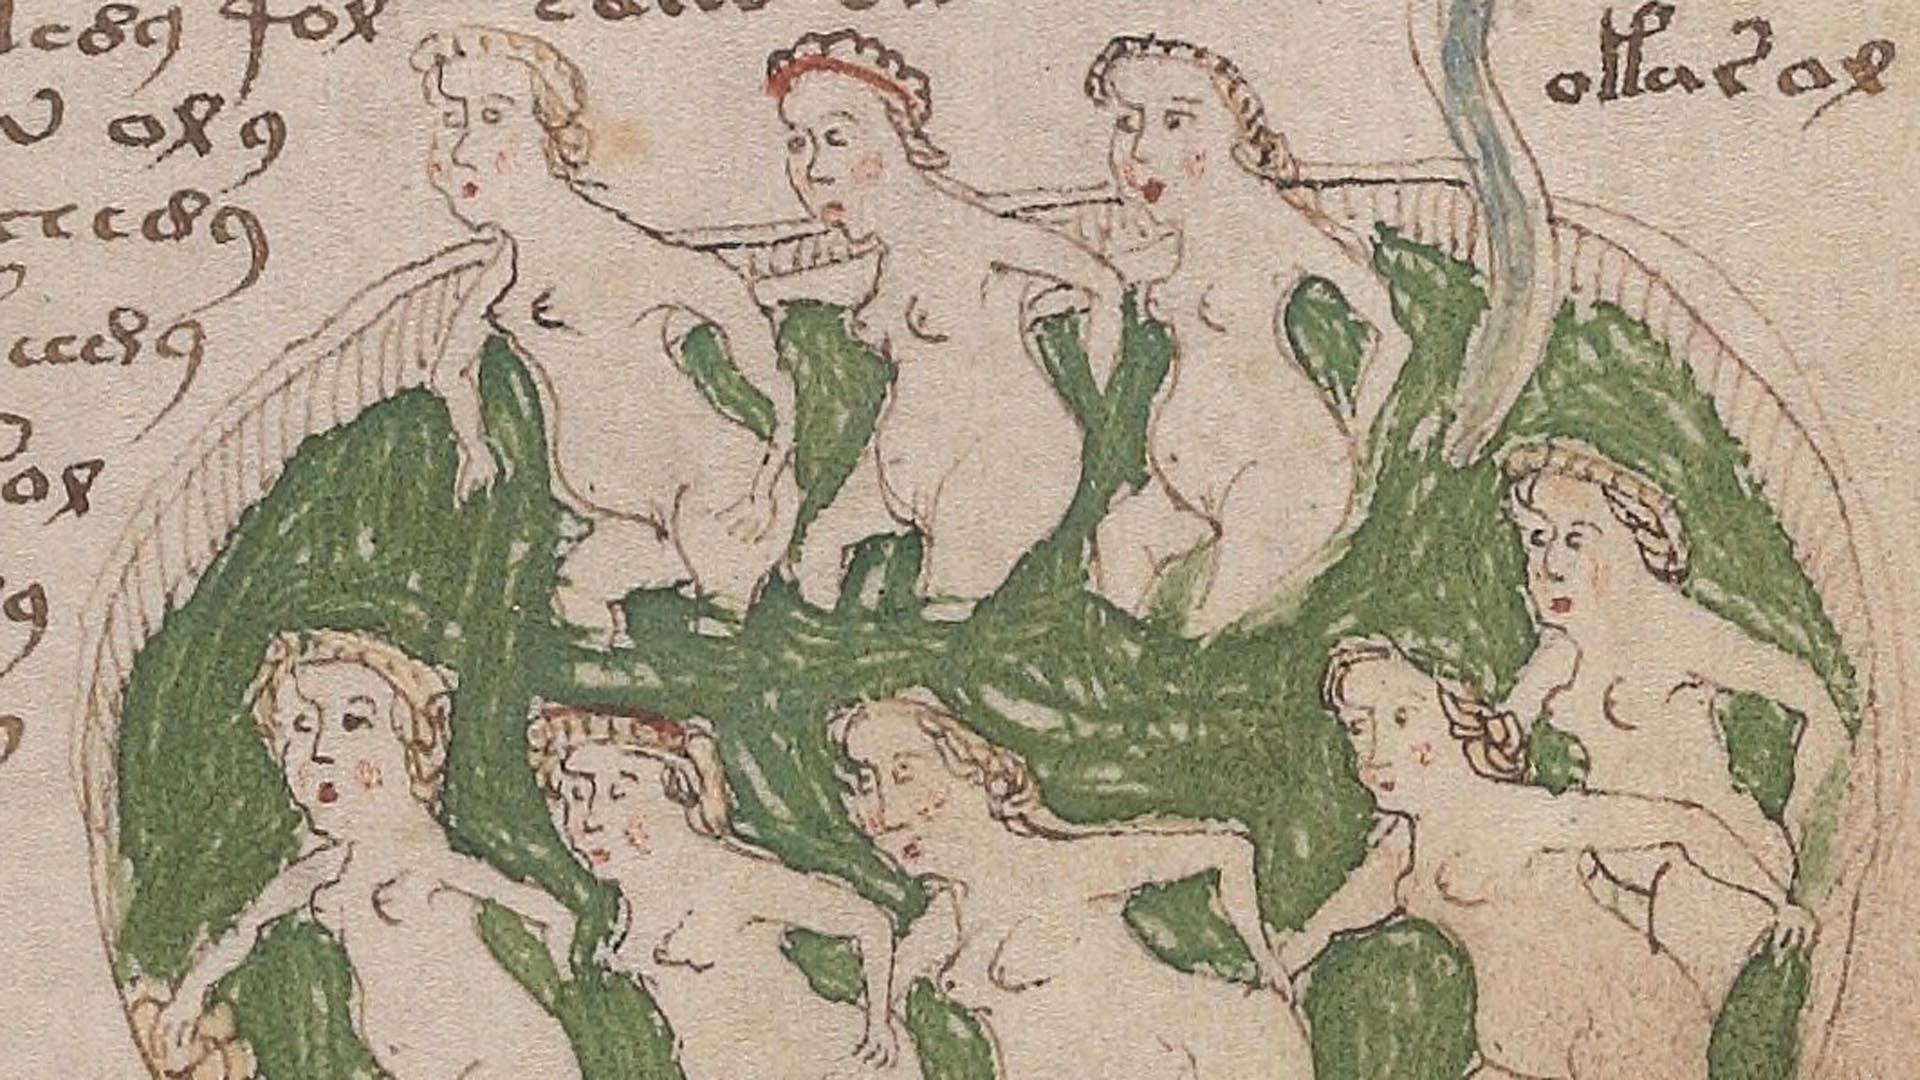 Illustrated nymphs in the Voynich manuscript.